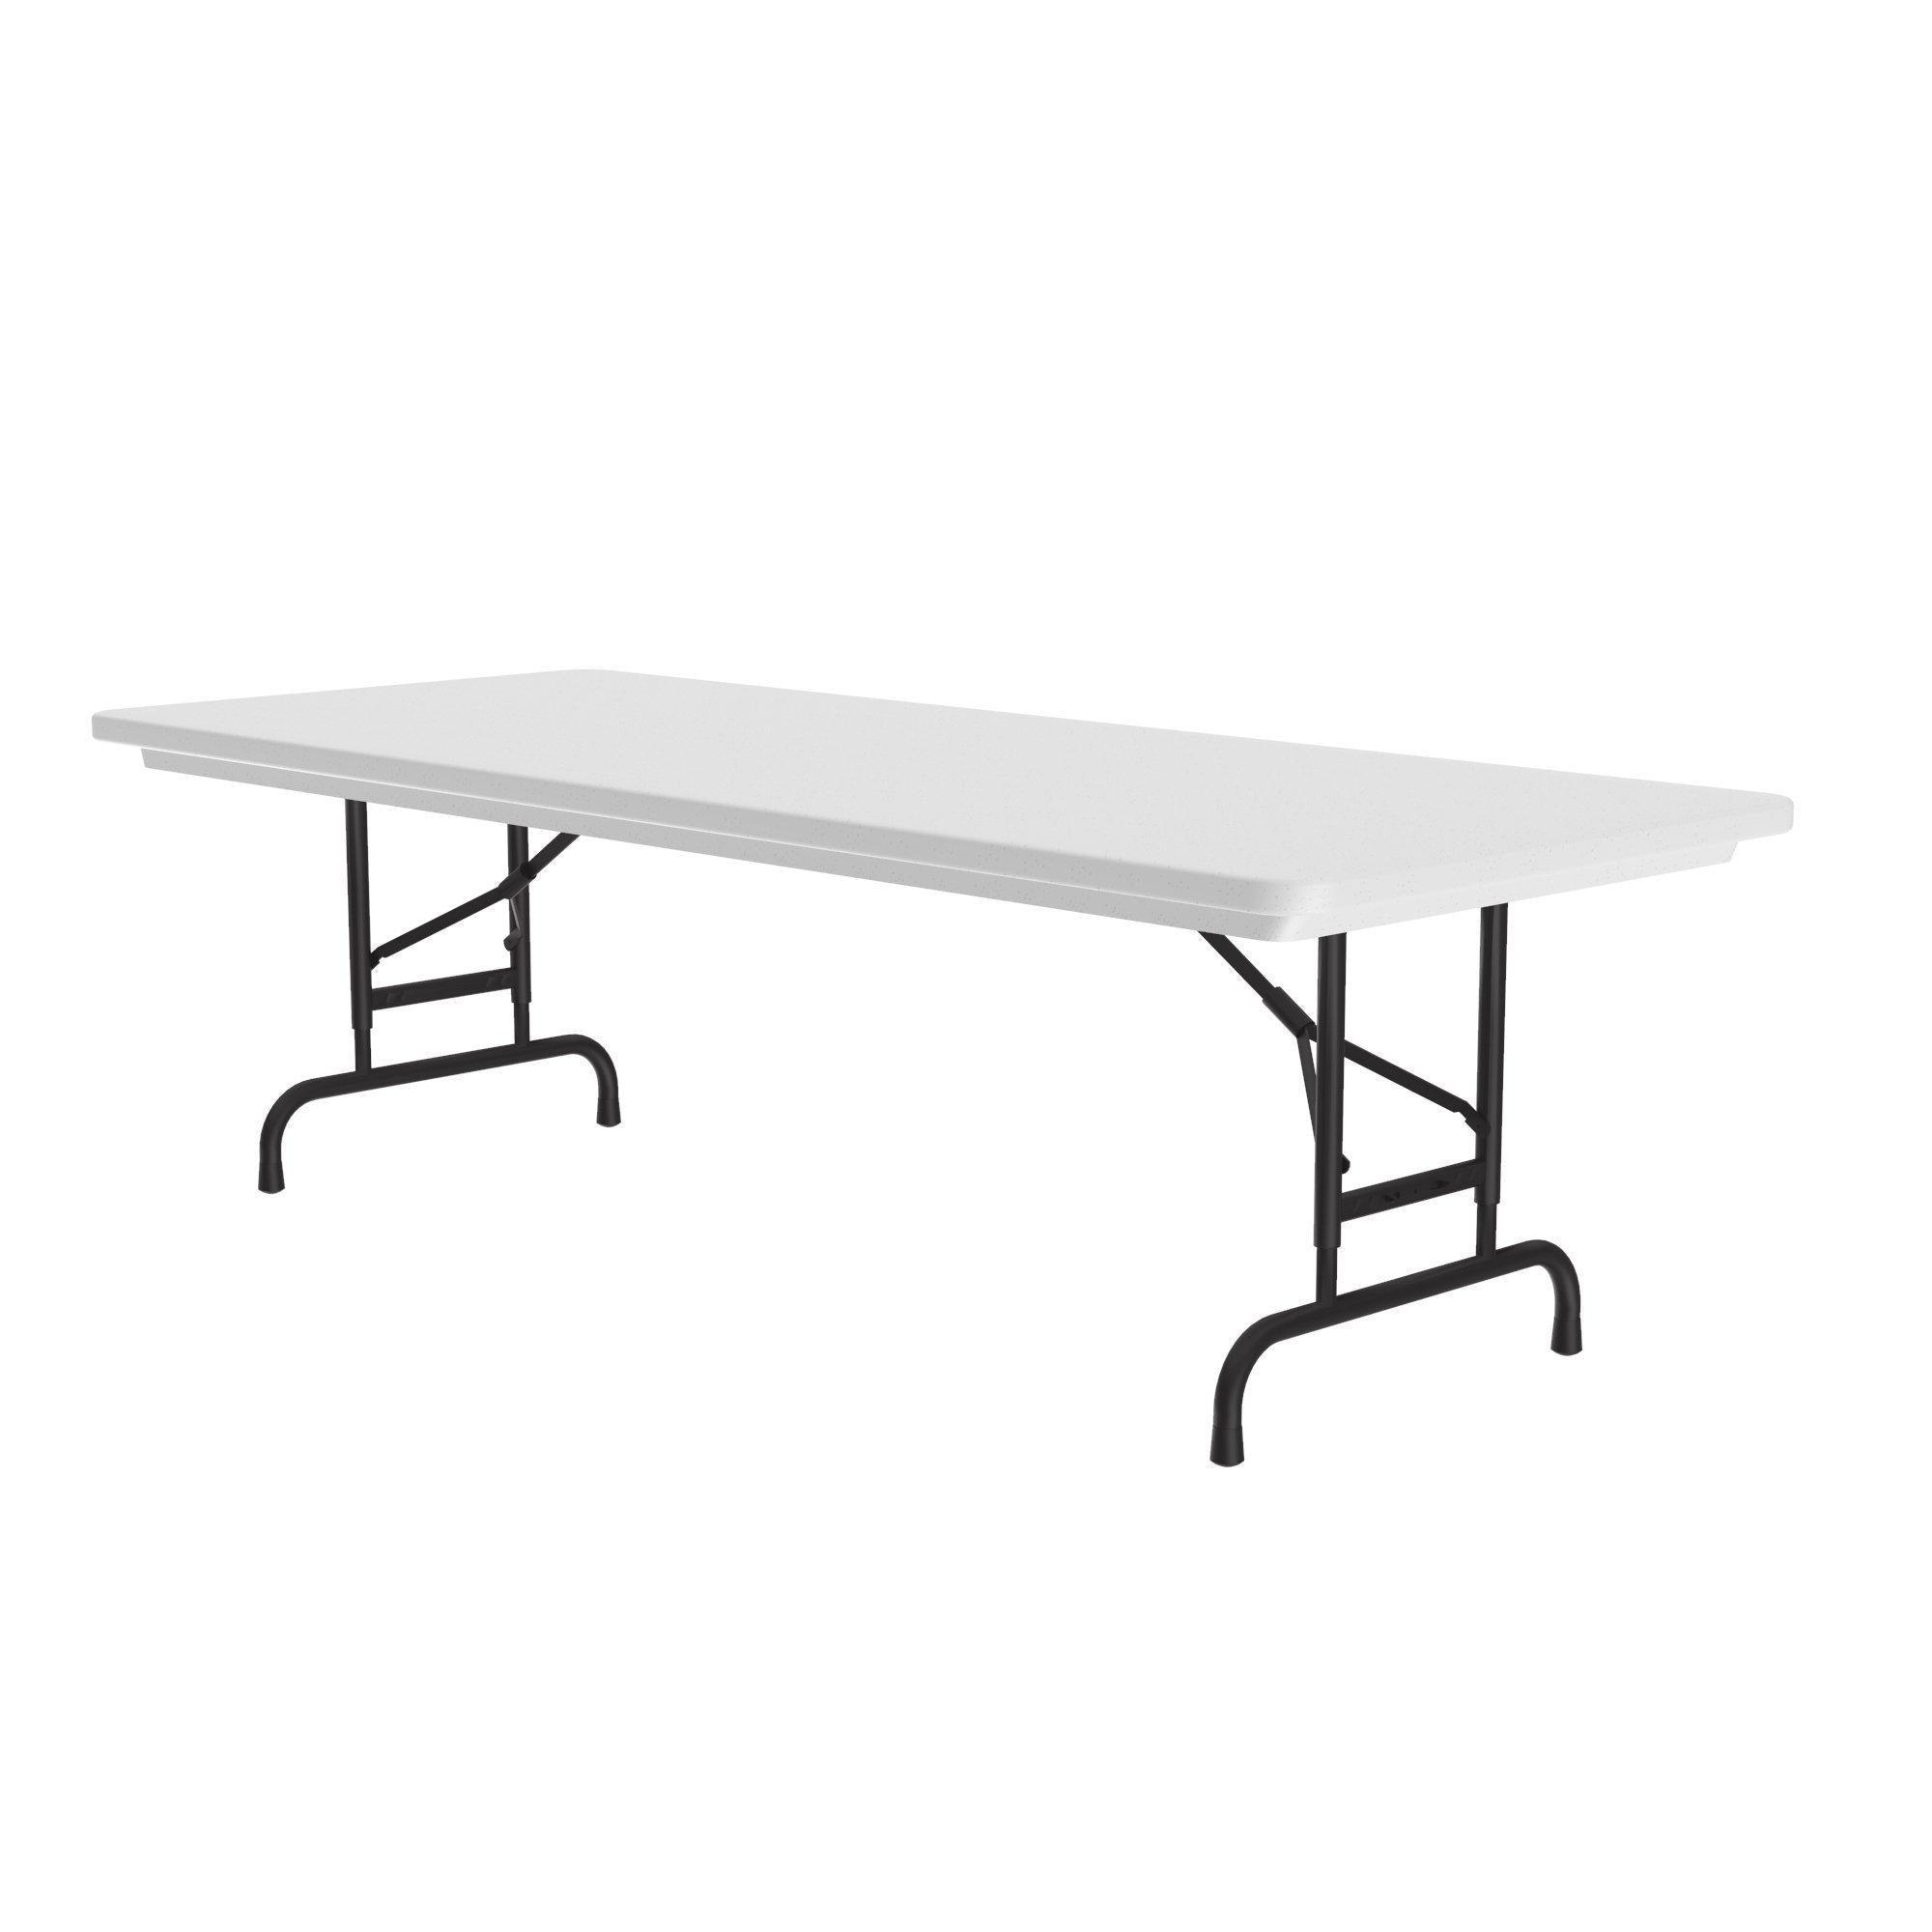 Heavy Duty Commercial Use Blow Molded Folding Table, Standard Colors, Adjustable Height, 30 x 96